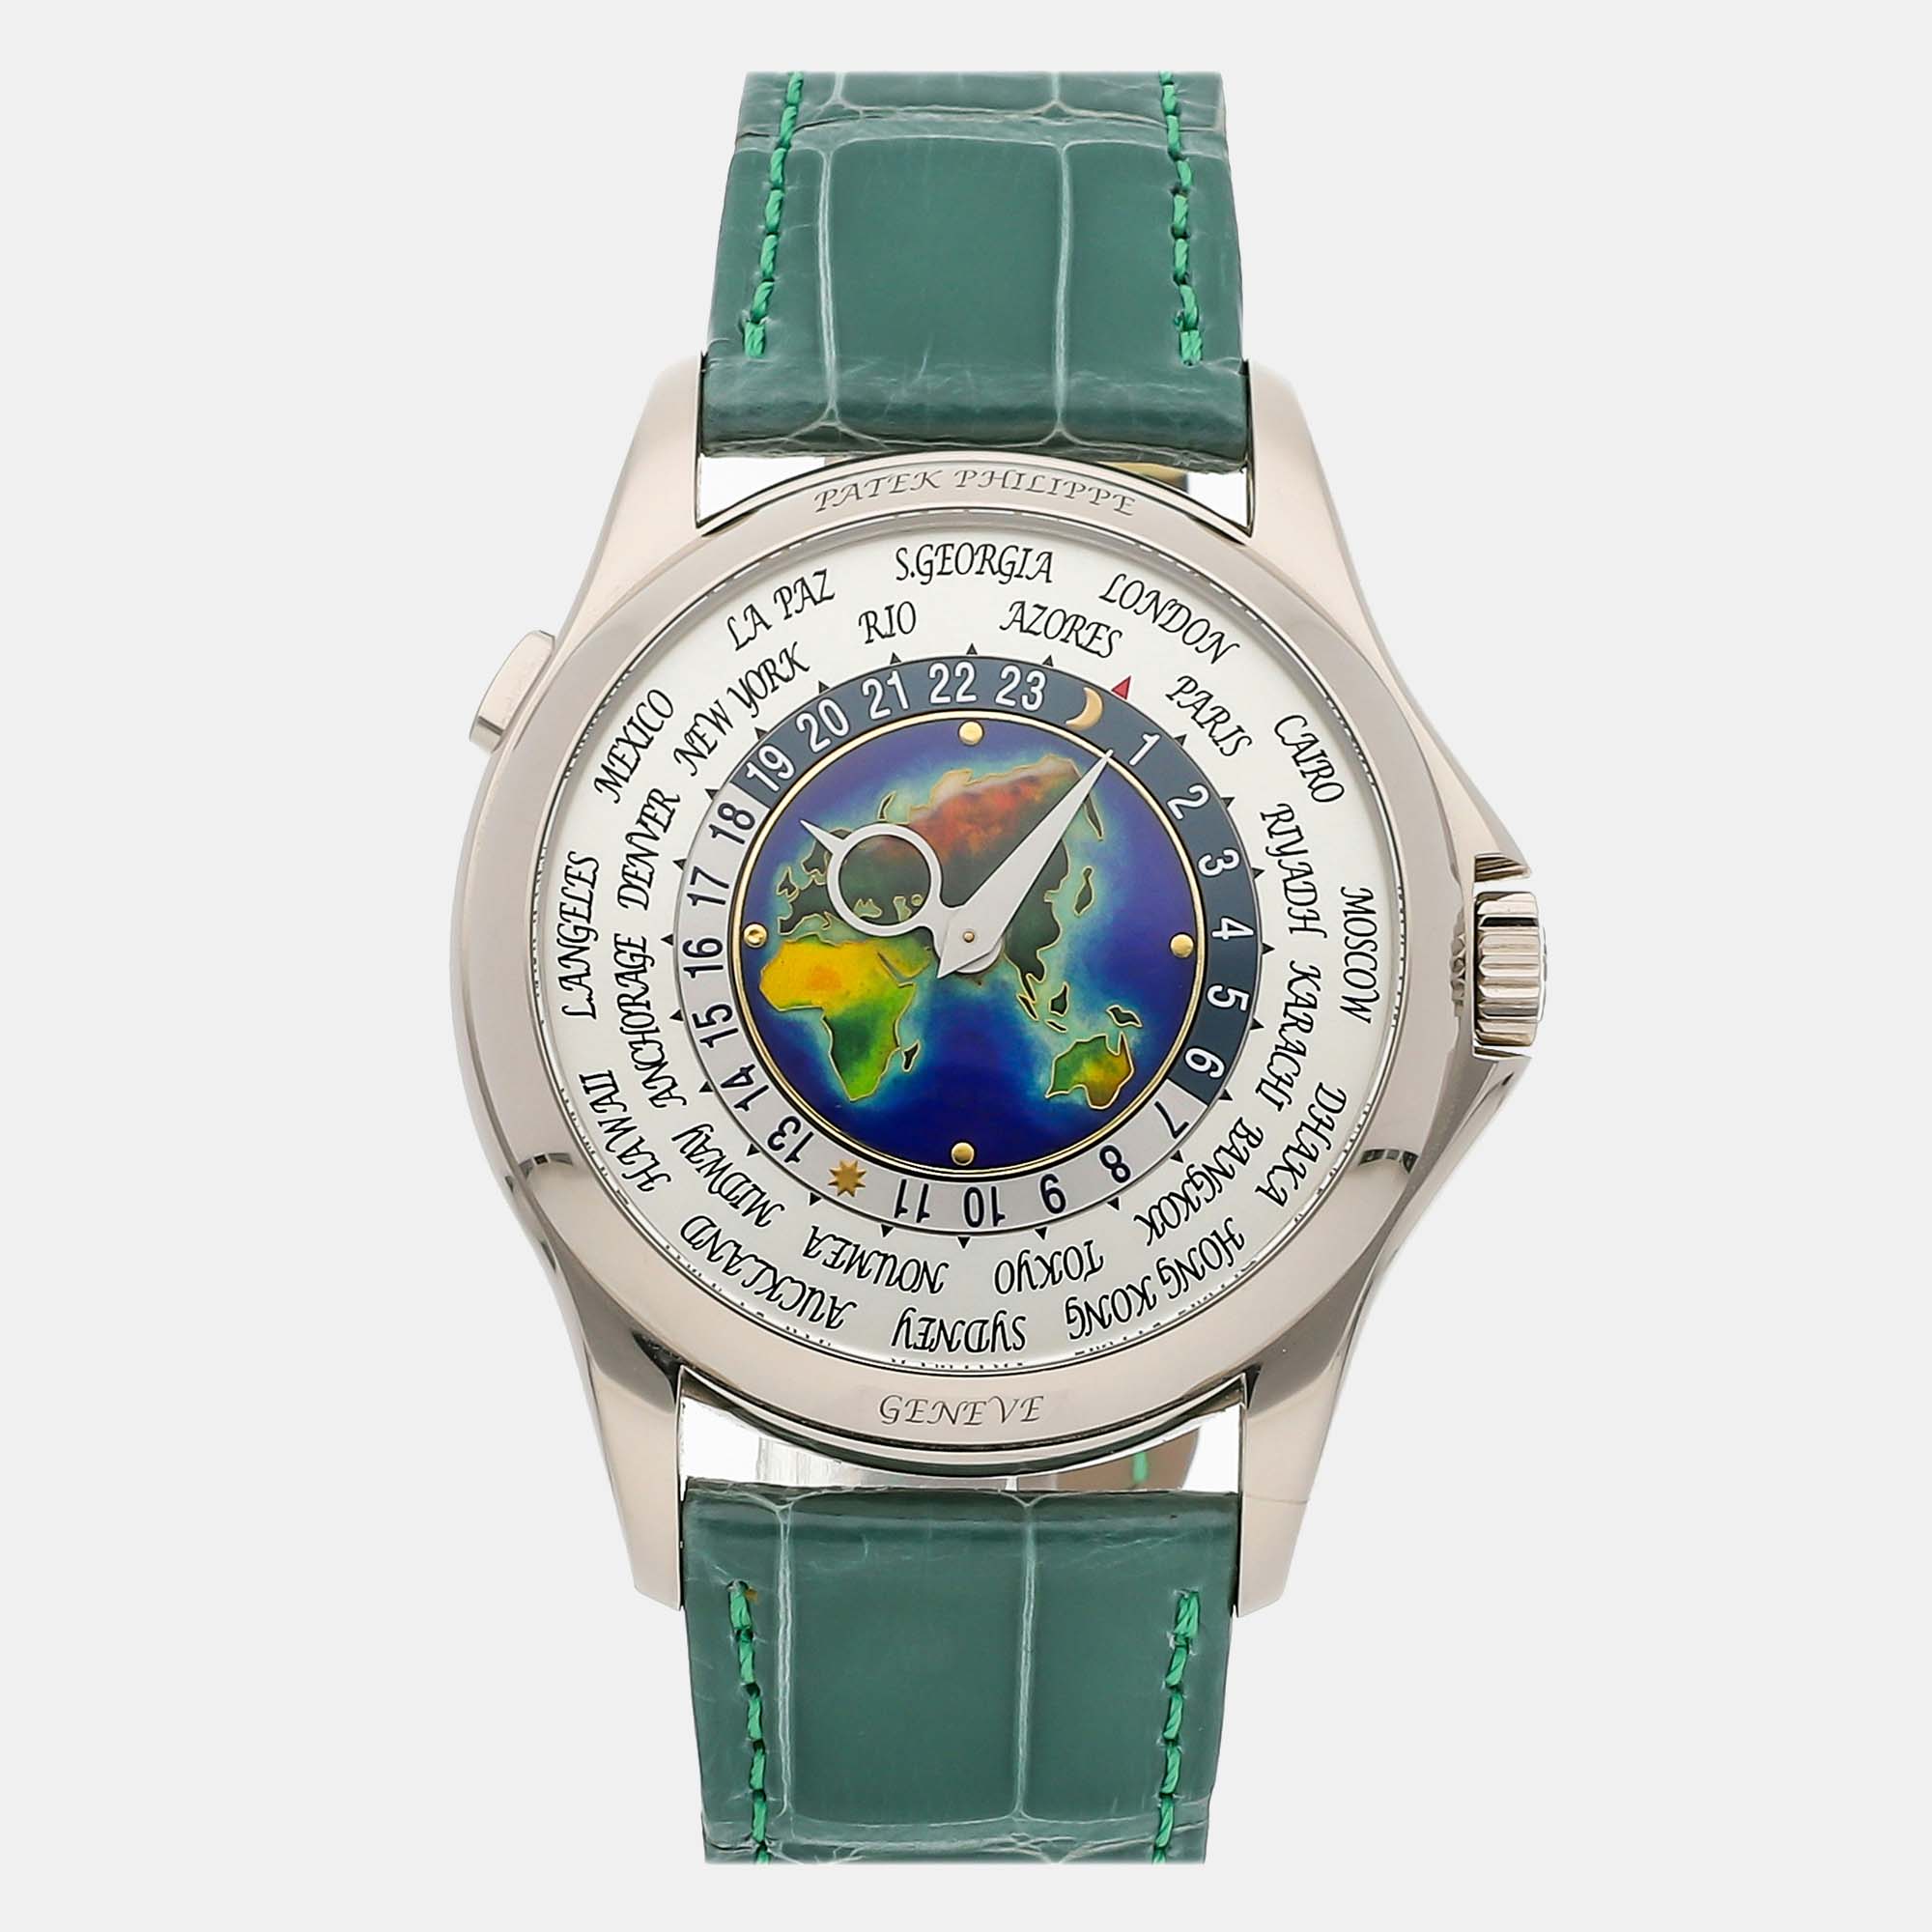 Pre-owned Patek Philippe Silver 18k White Gold Complications 5131g-010 Men's Wristwatch 40 Mm